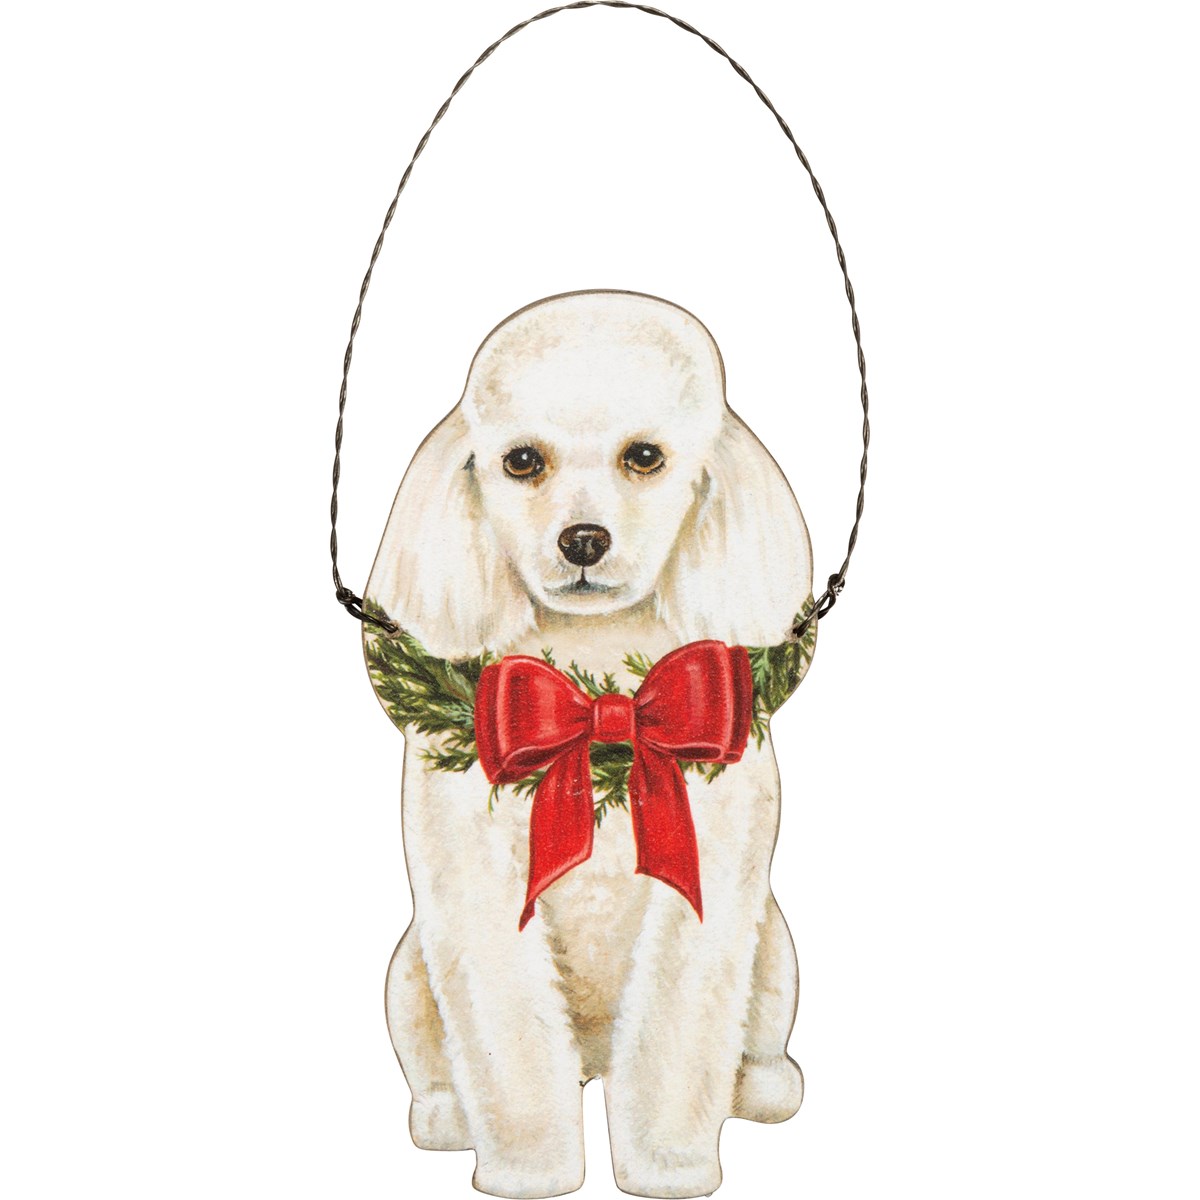 Christmas Poodle Ornament - Wood, Paper, Wire